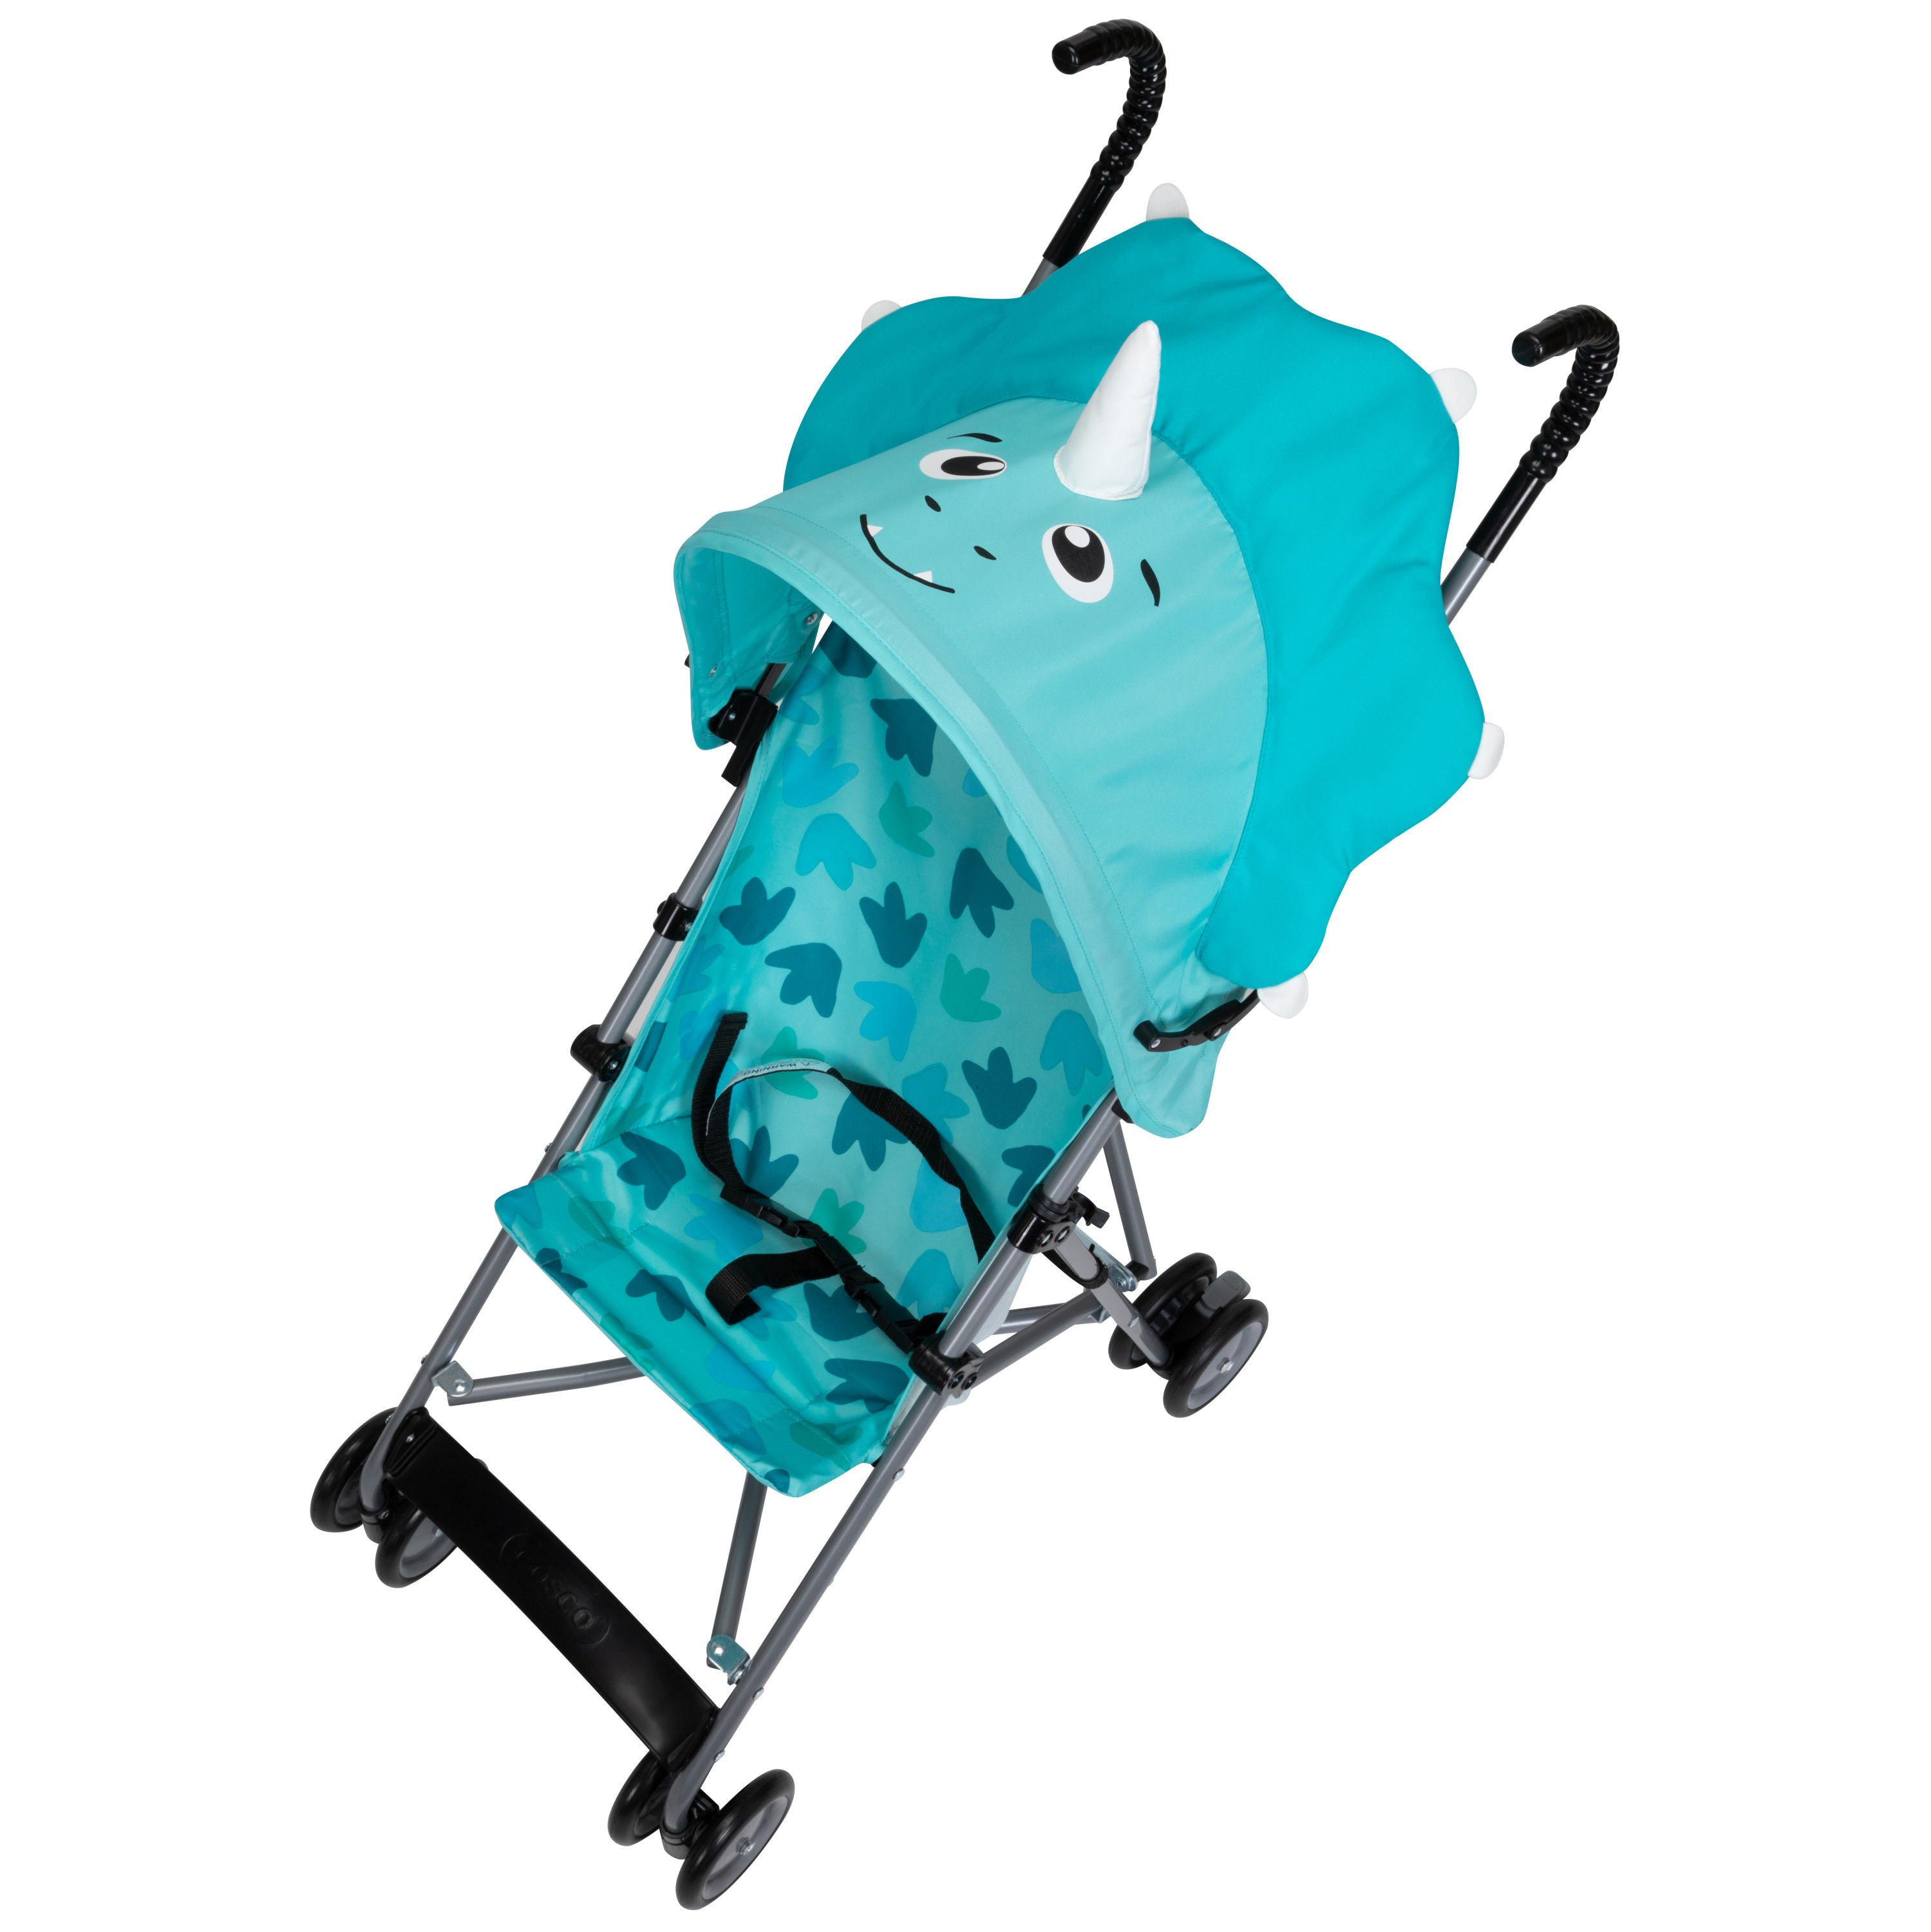 Cosco Kids Comfort Height Toddler Umbrella Stroller with Canopy, Donnie Dino - image 1 of 14